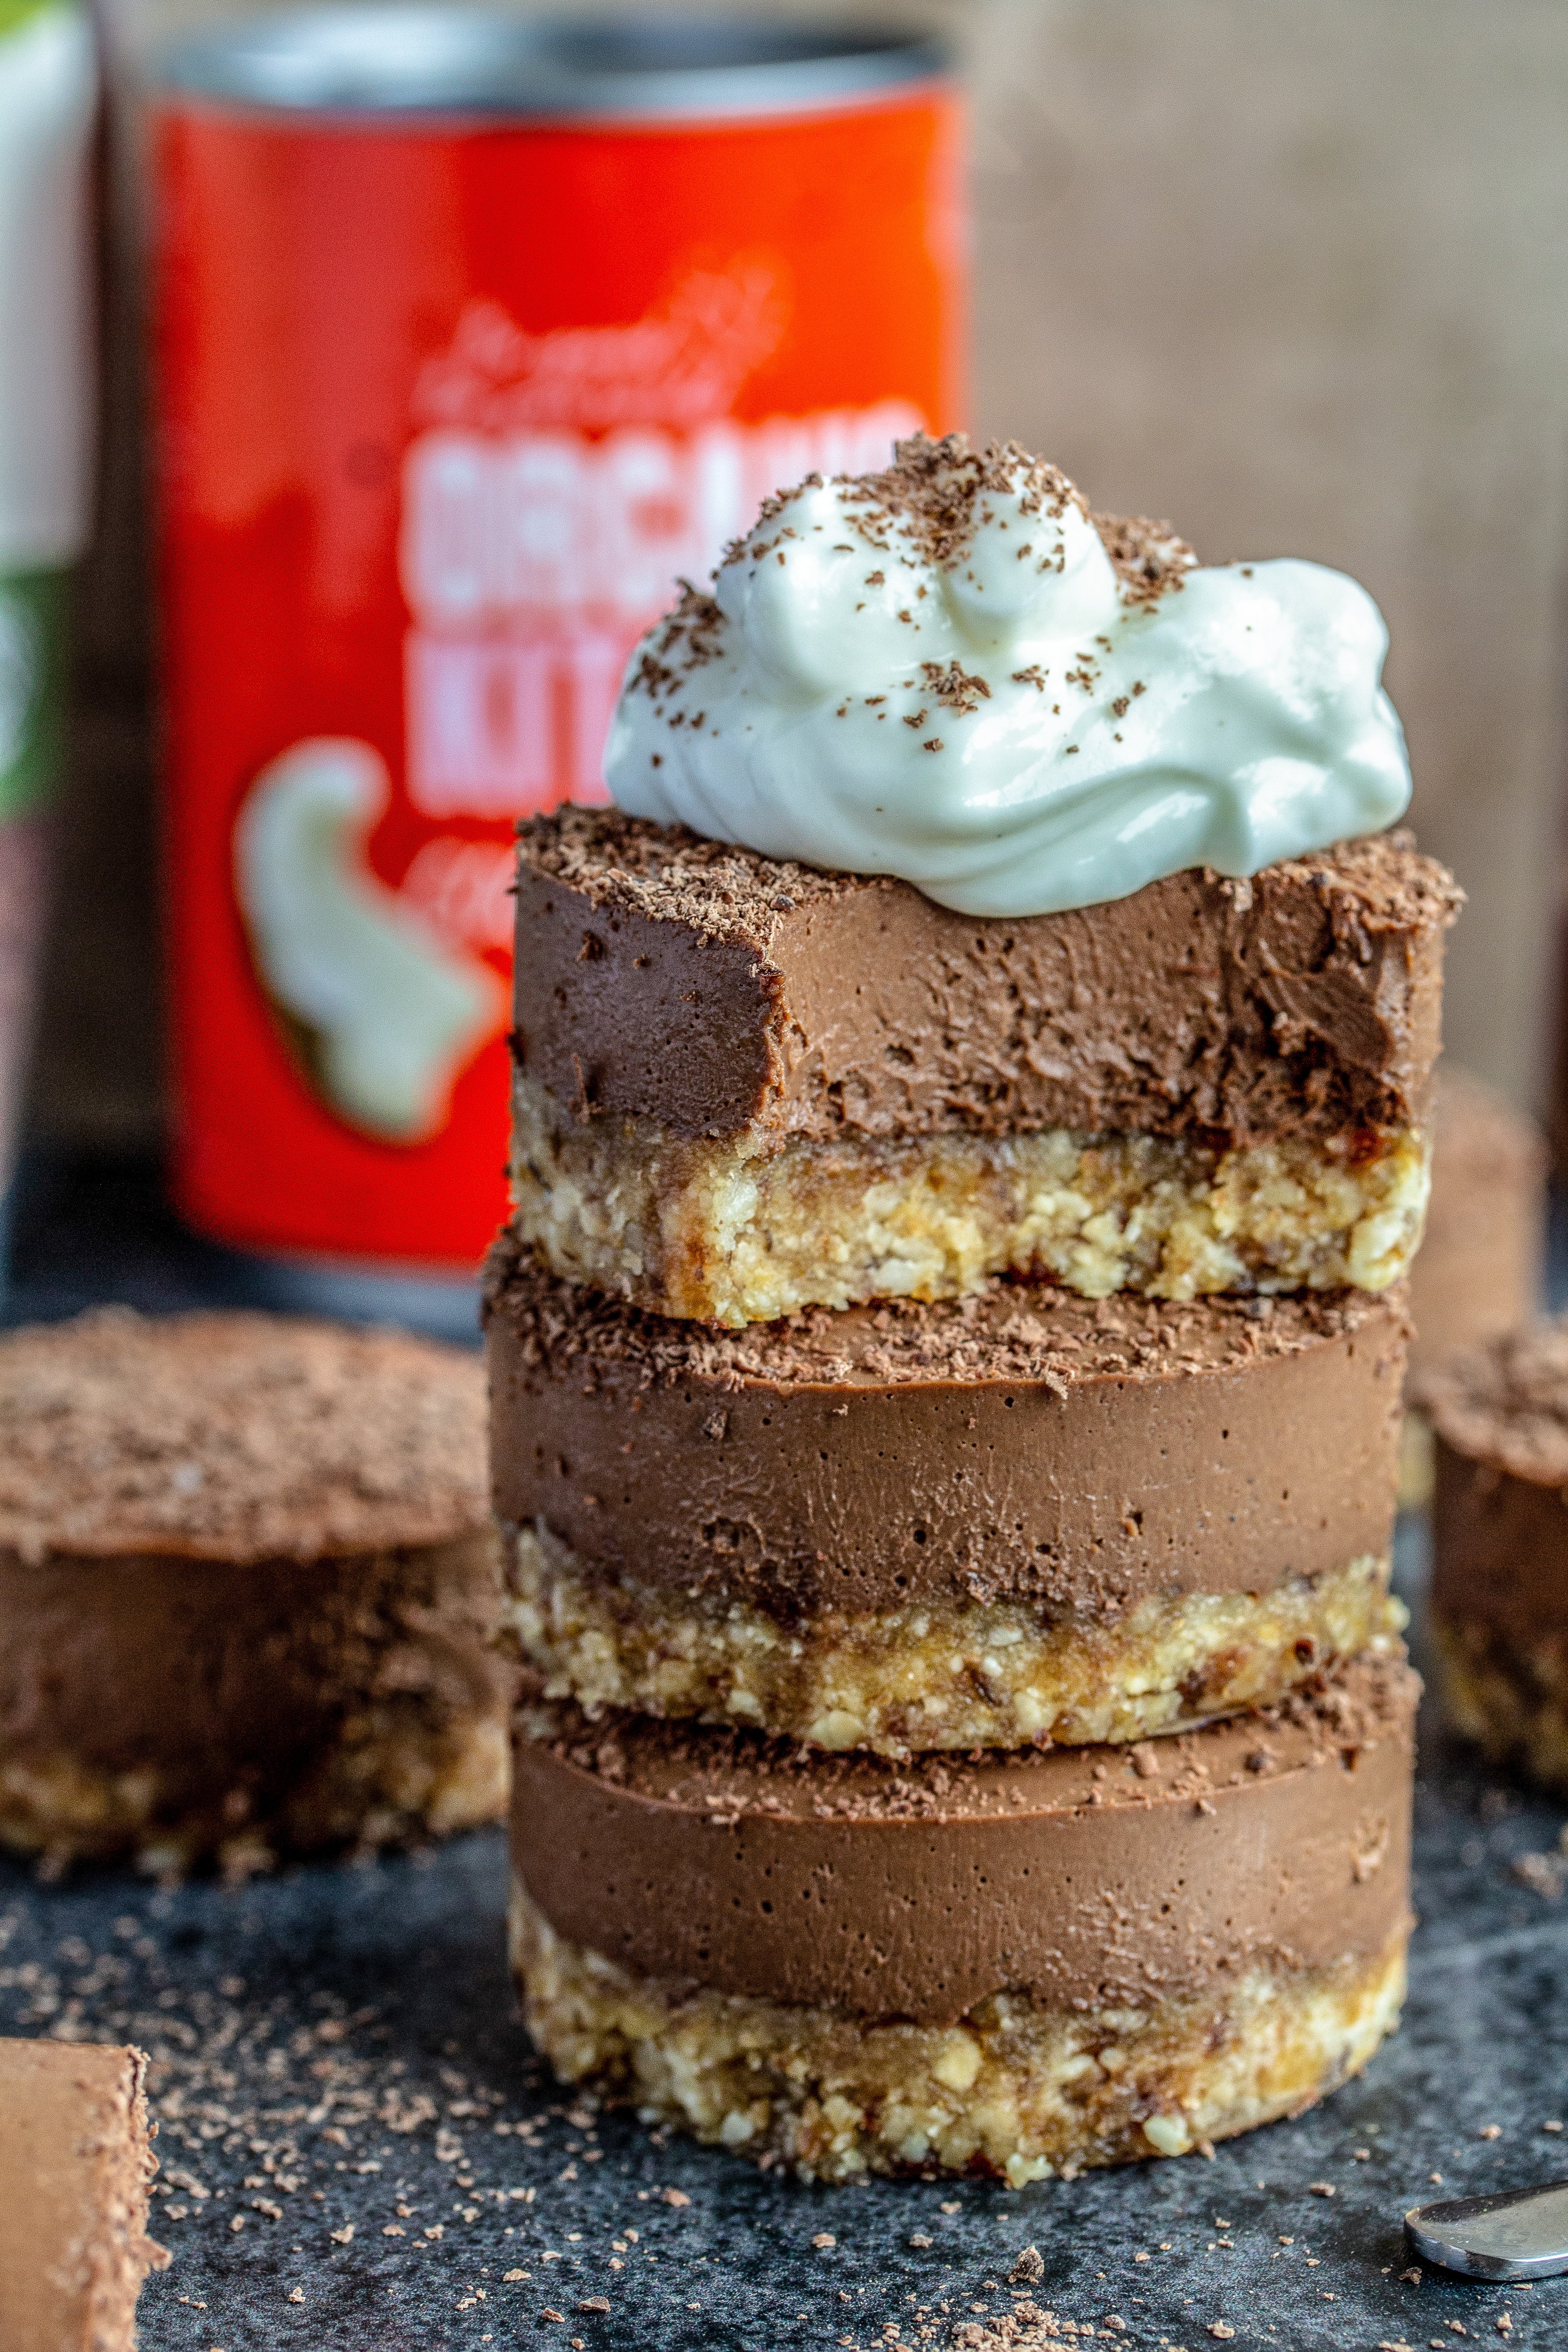 No-Bake Chocolate Mousse “Cheesecakes”